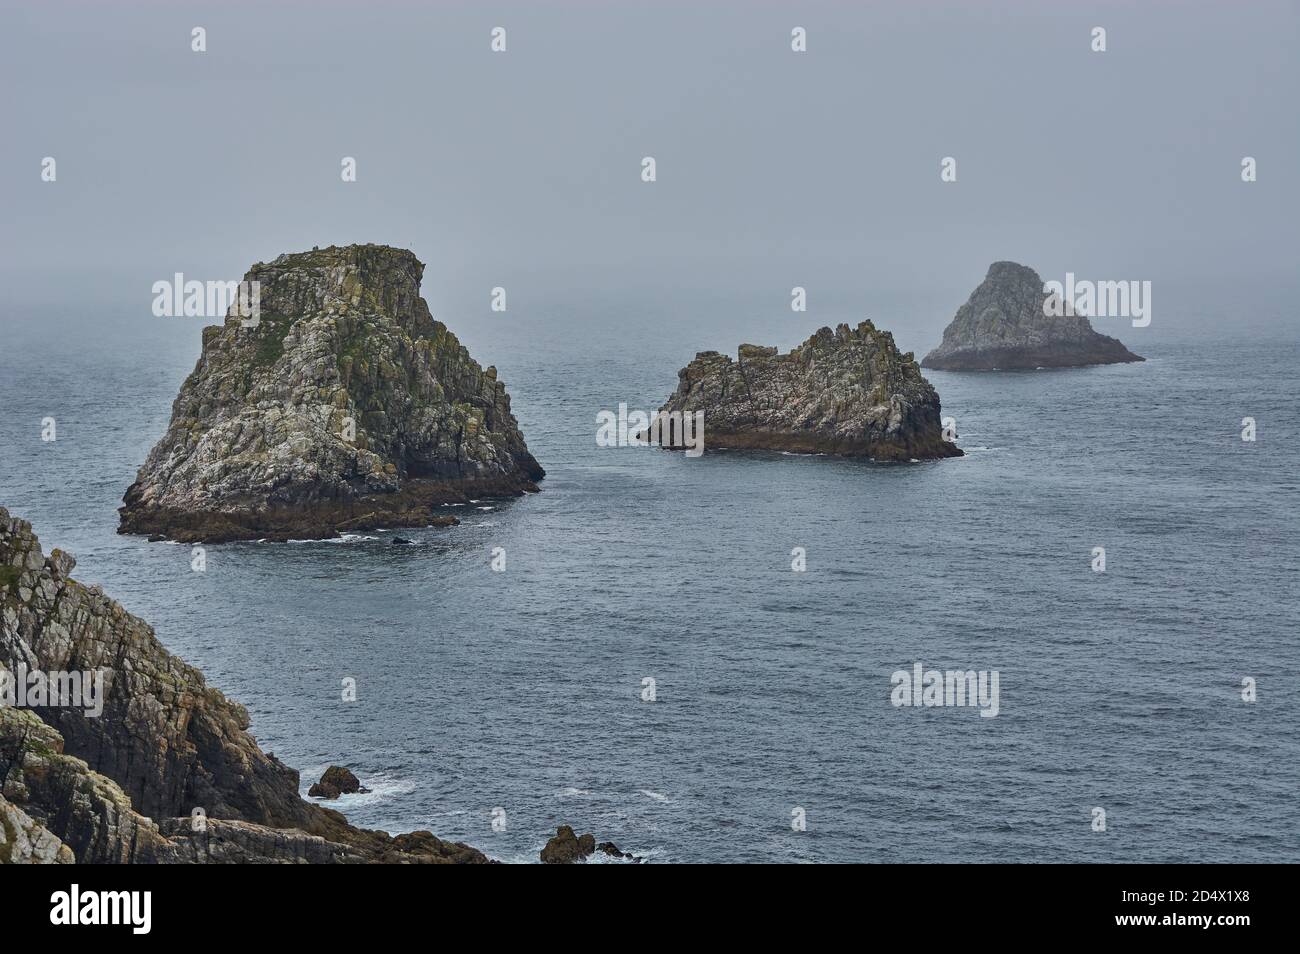 Mystical rock formation in the misty atlantic ocean. Rocky islands at the coastline of Brittany, France. Stock Photo